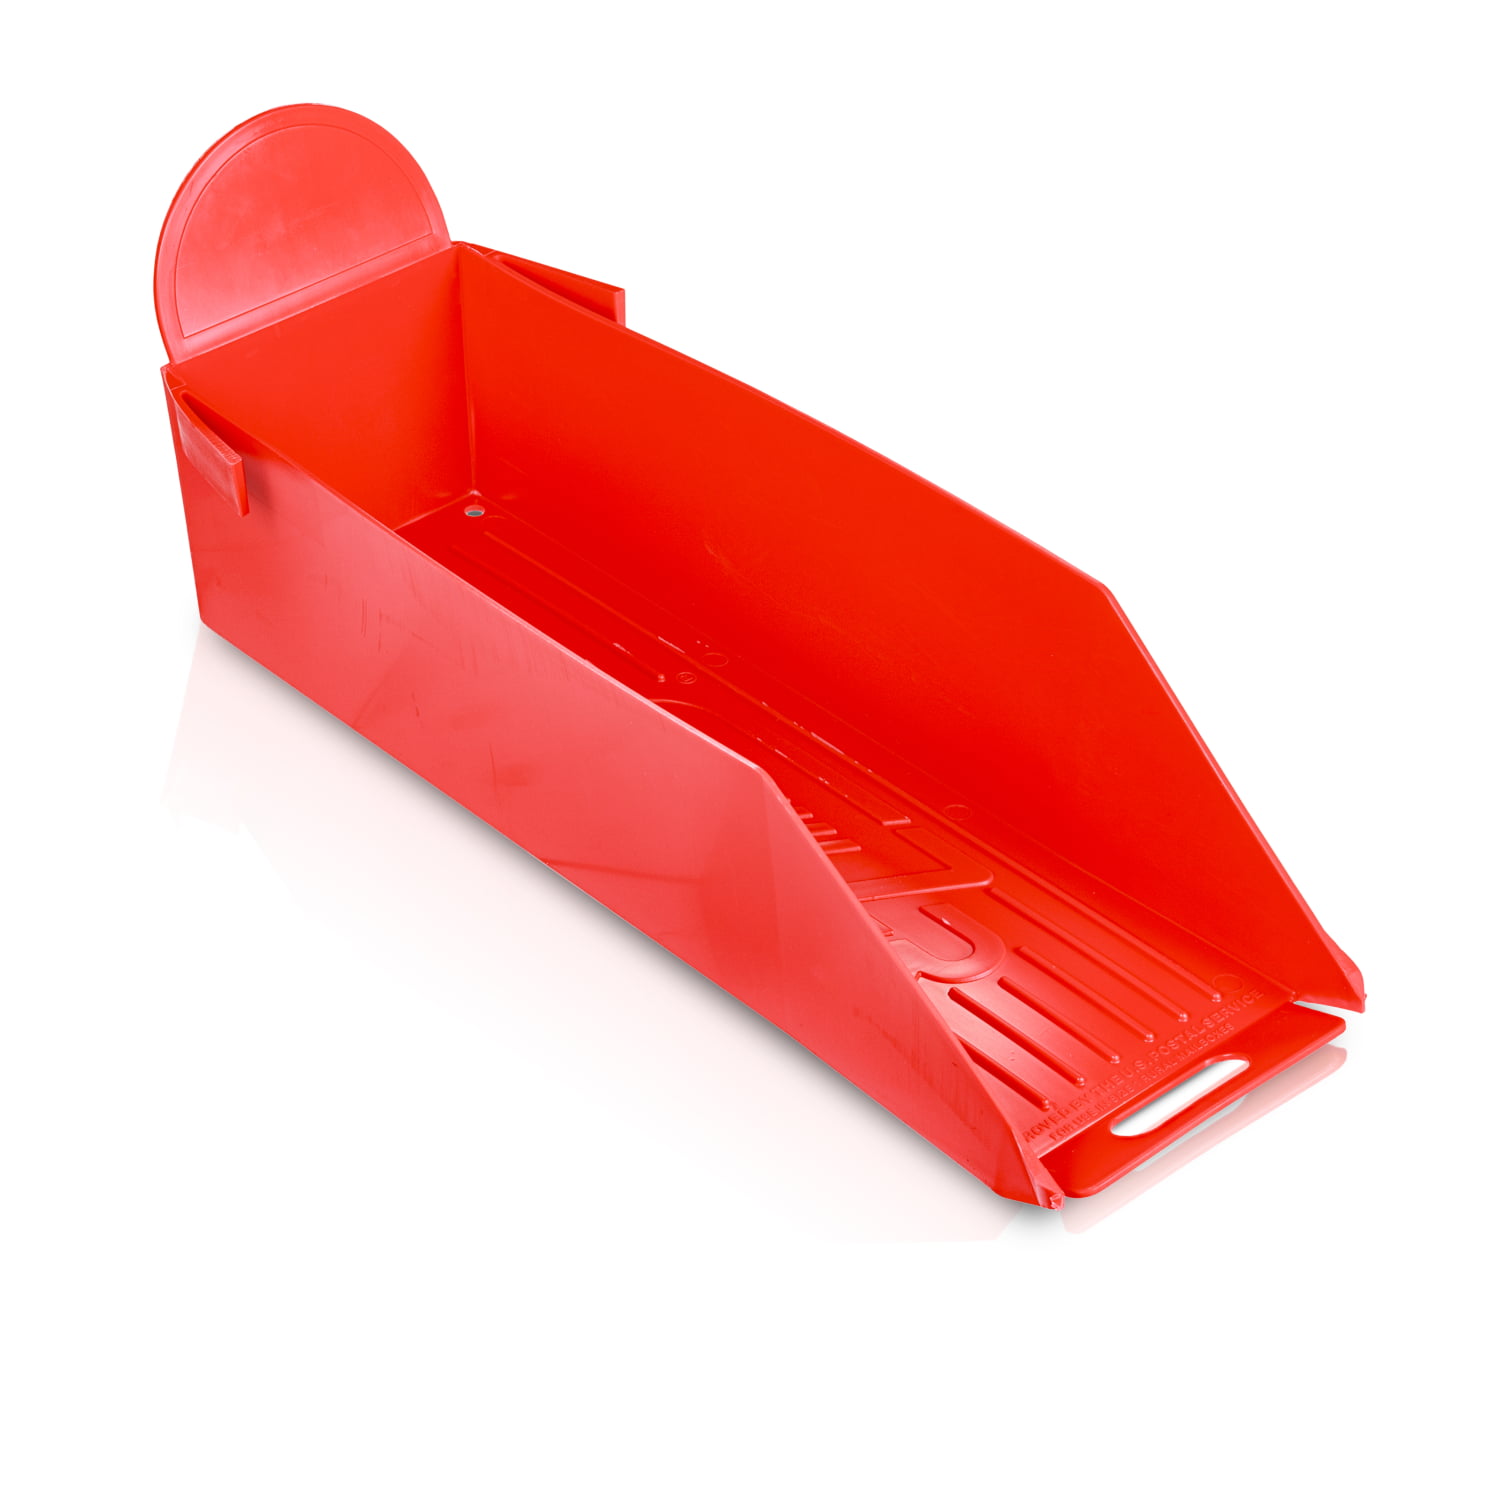 SLIDE OUT MAIL EXTENDER FOR STANDARD OR MEDIUM SIZE MAILBOX. 